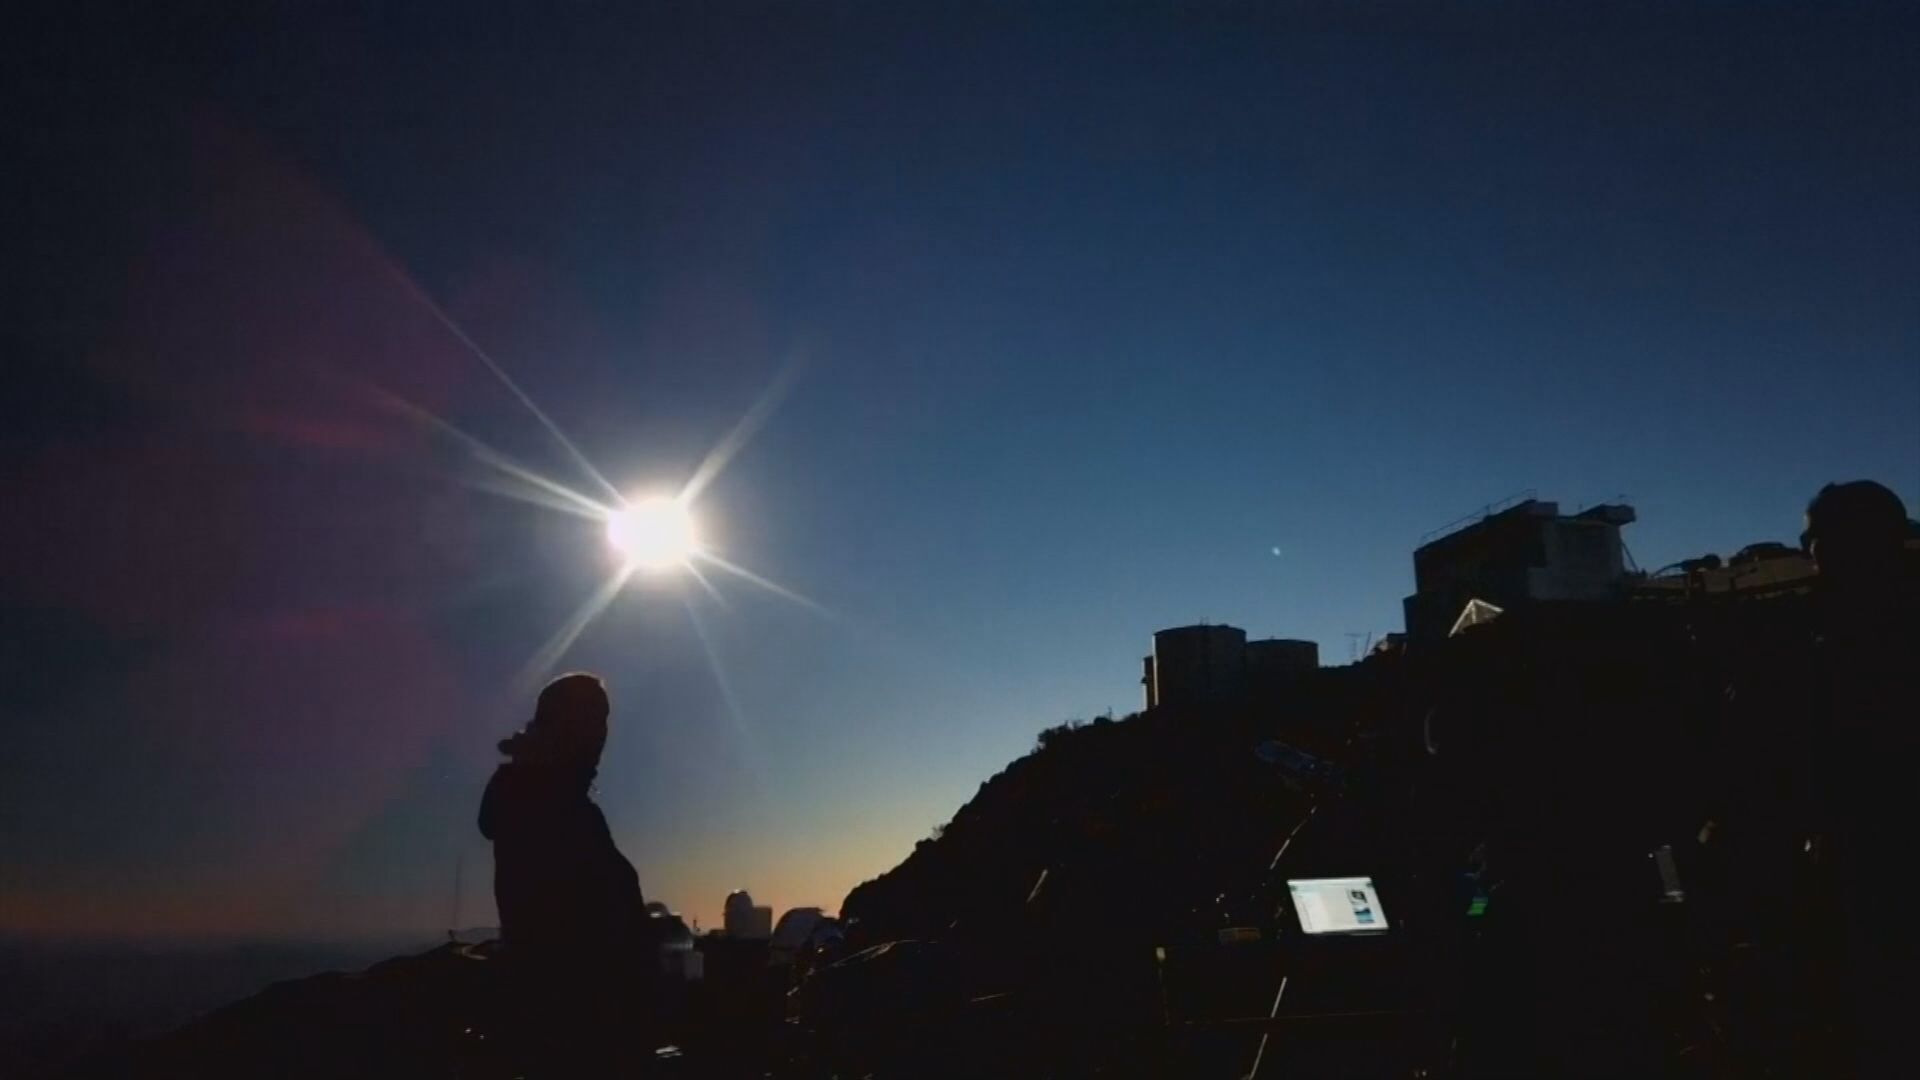 Montreal scientists denounce Quebec's approach to solar eclipse